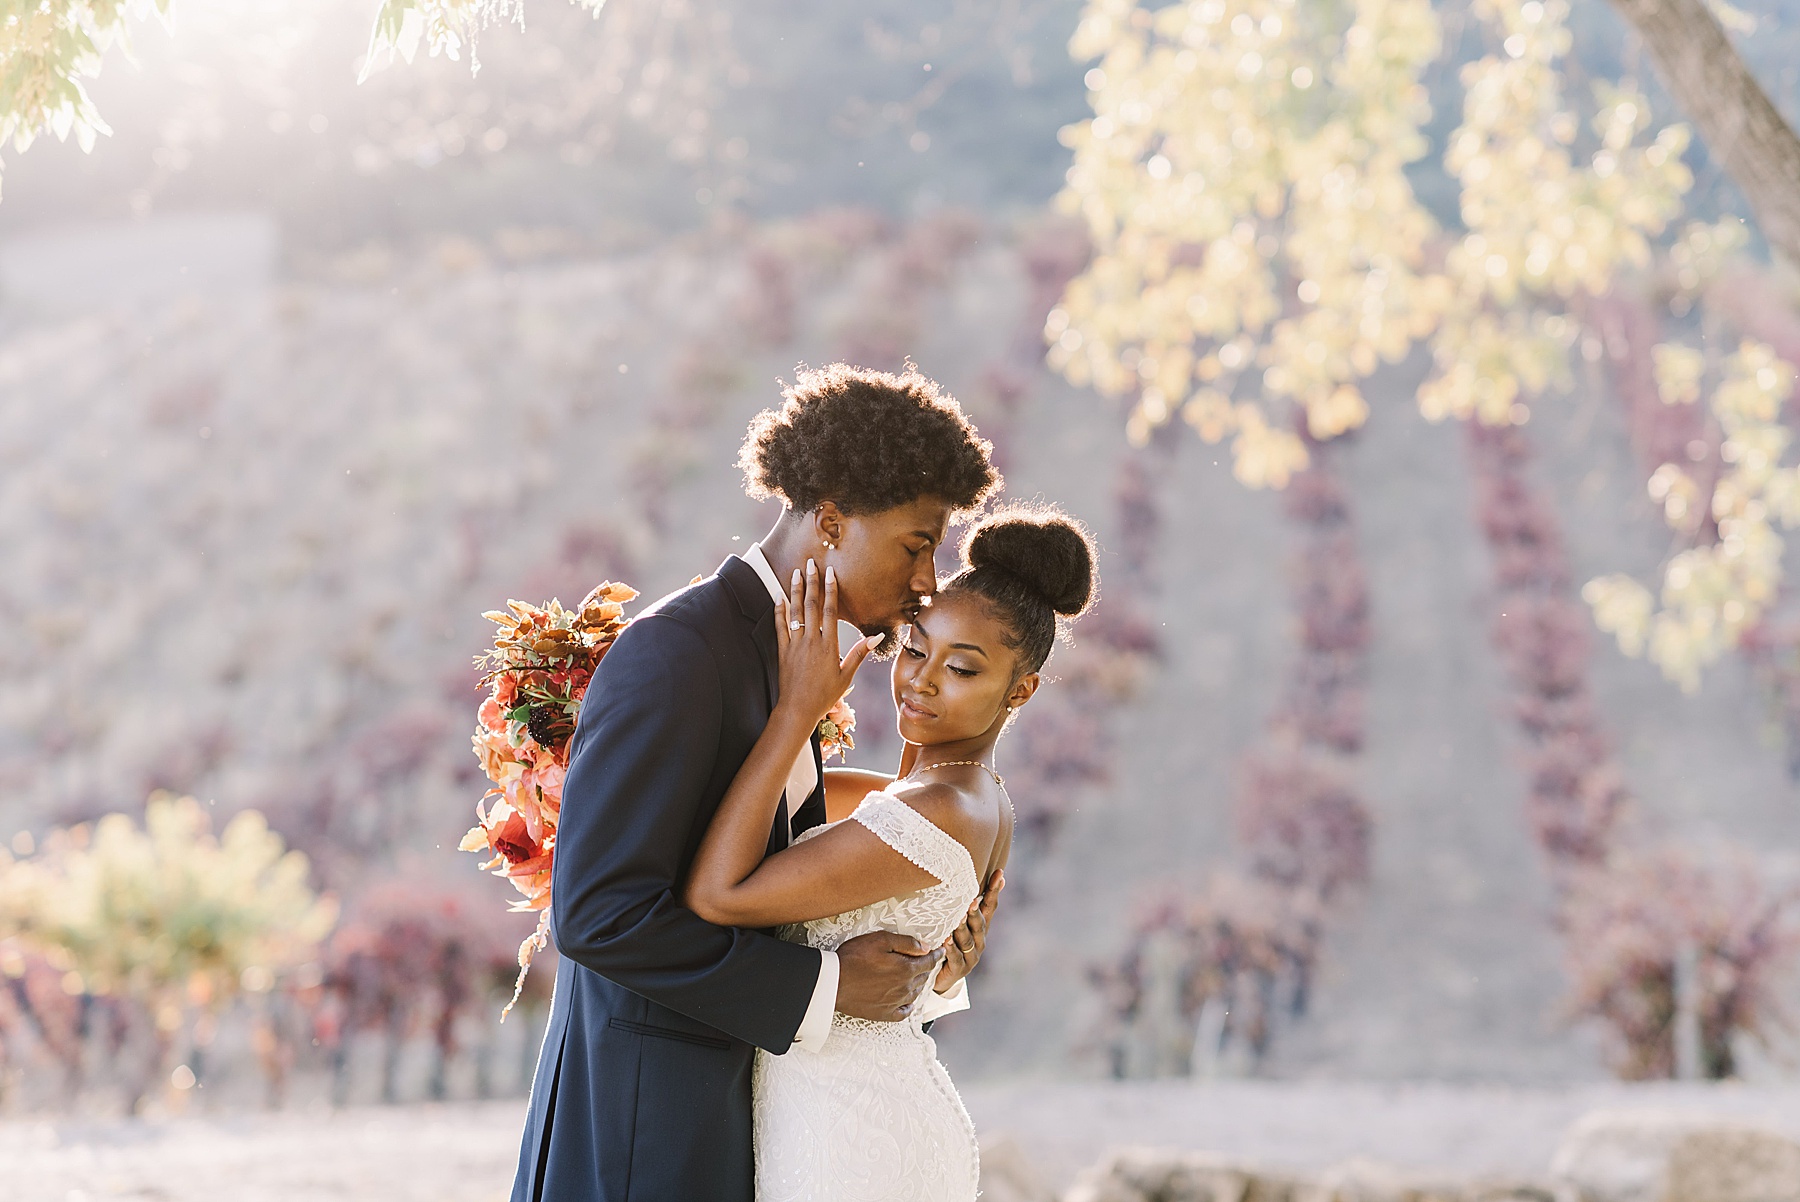 Wondering when to plan your wedding date? Check out Nikkels Photography, a California-based Wedding Photographers's recommendations.